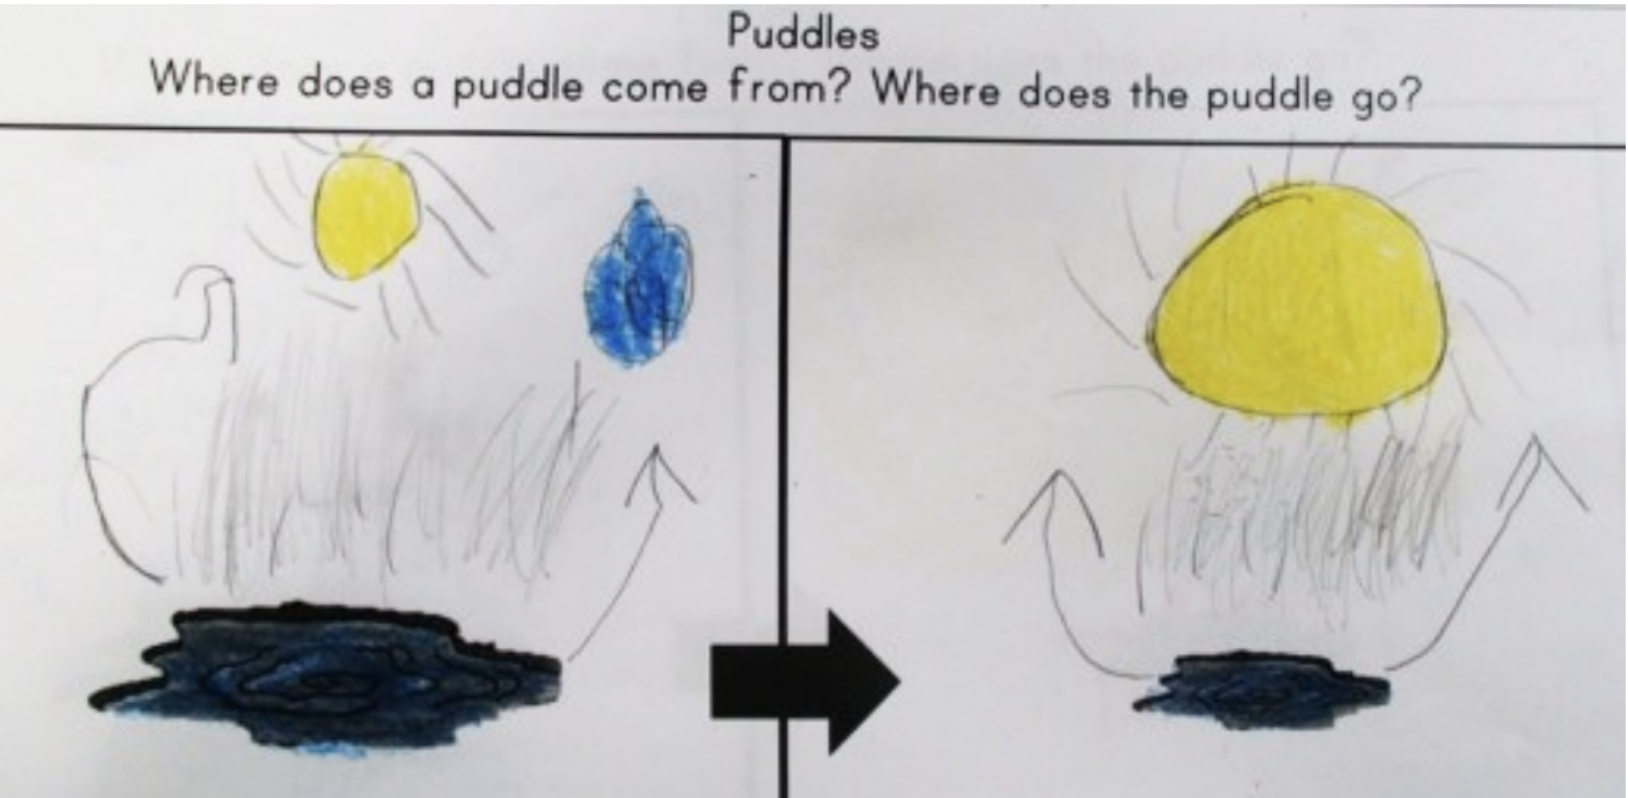 A kindergarten student's model of where puddles come from and go. The model shows the sun and a puddle with upward arrows pointed toward the sun in both panels of the model.